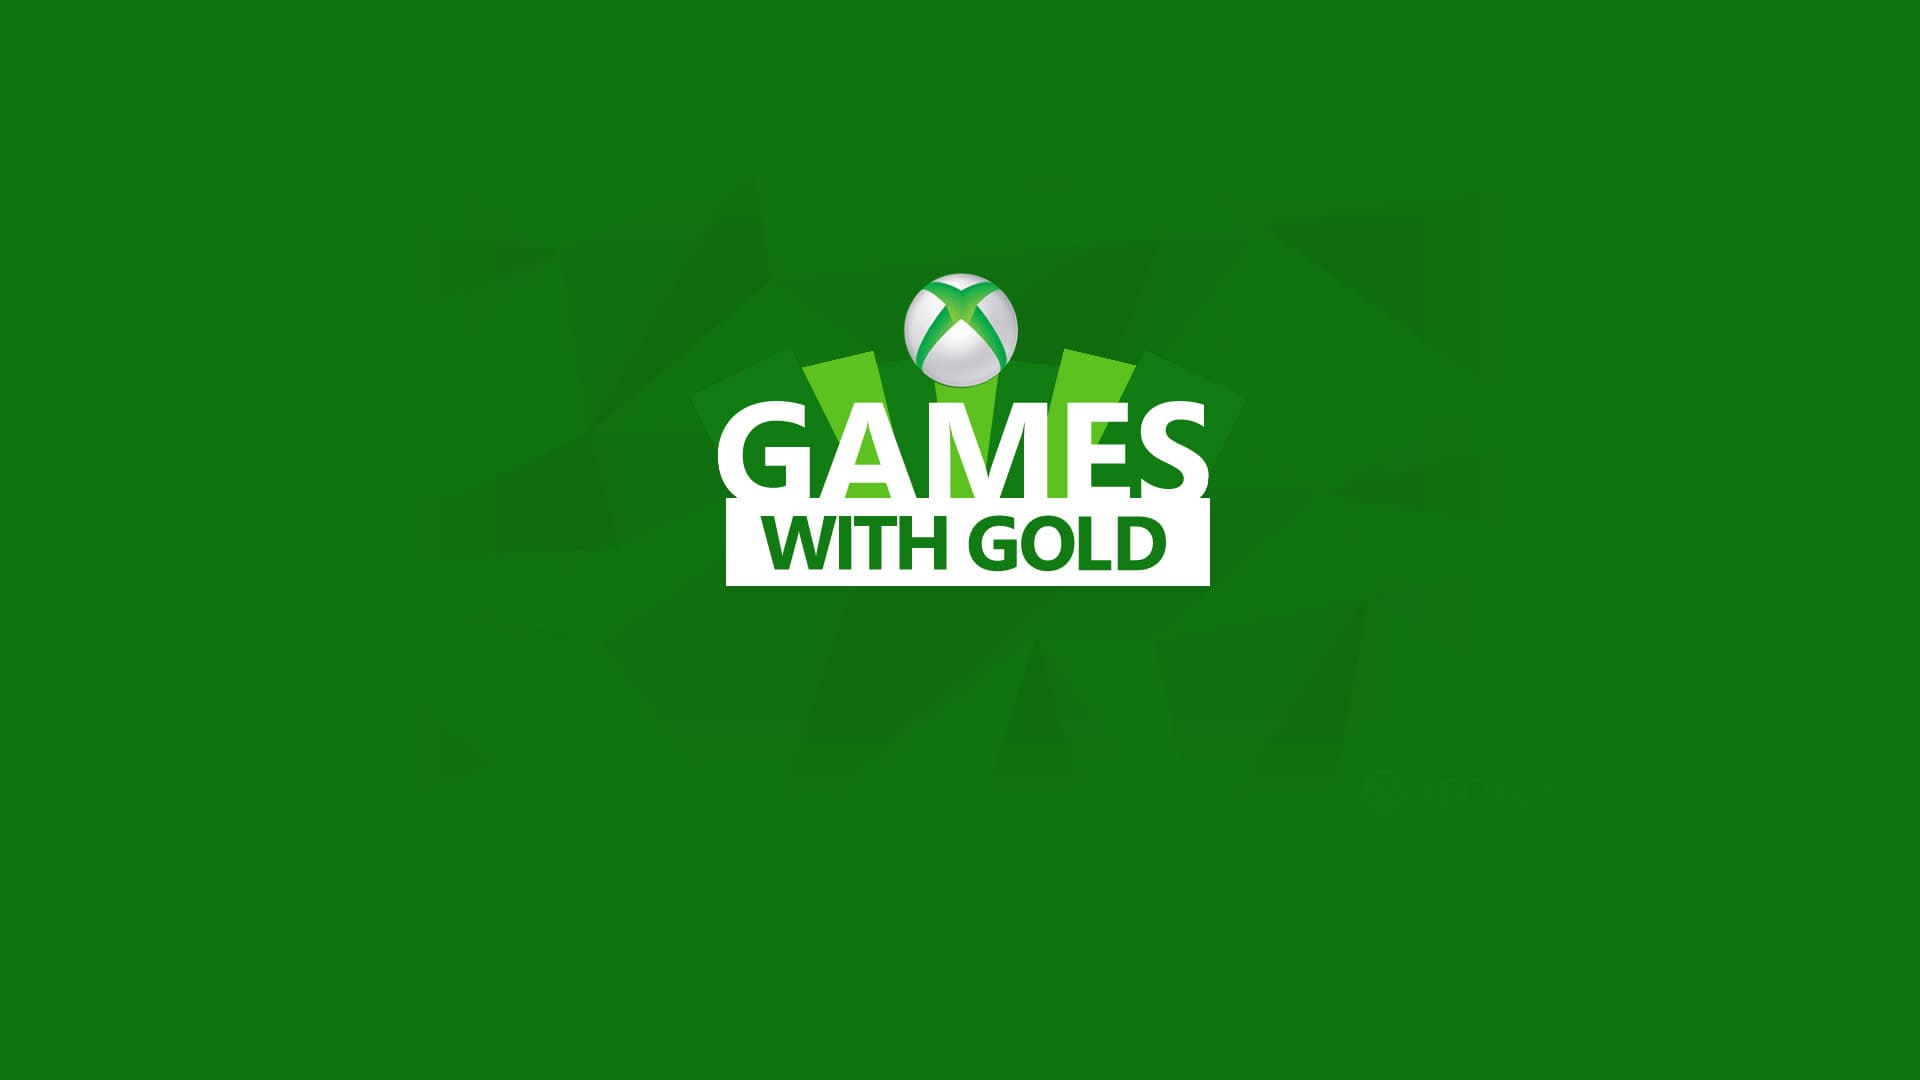 Xbox live games. Xbox Live Gold. Games with Gold. Xbox Gold August 2018.